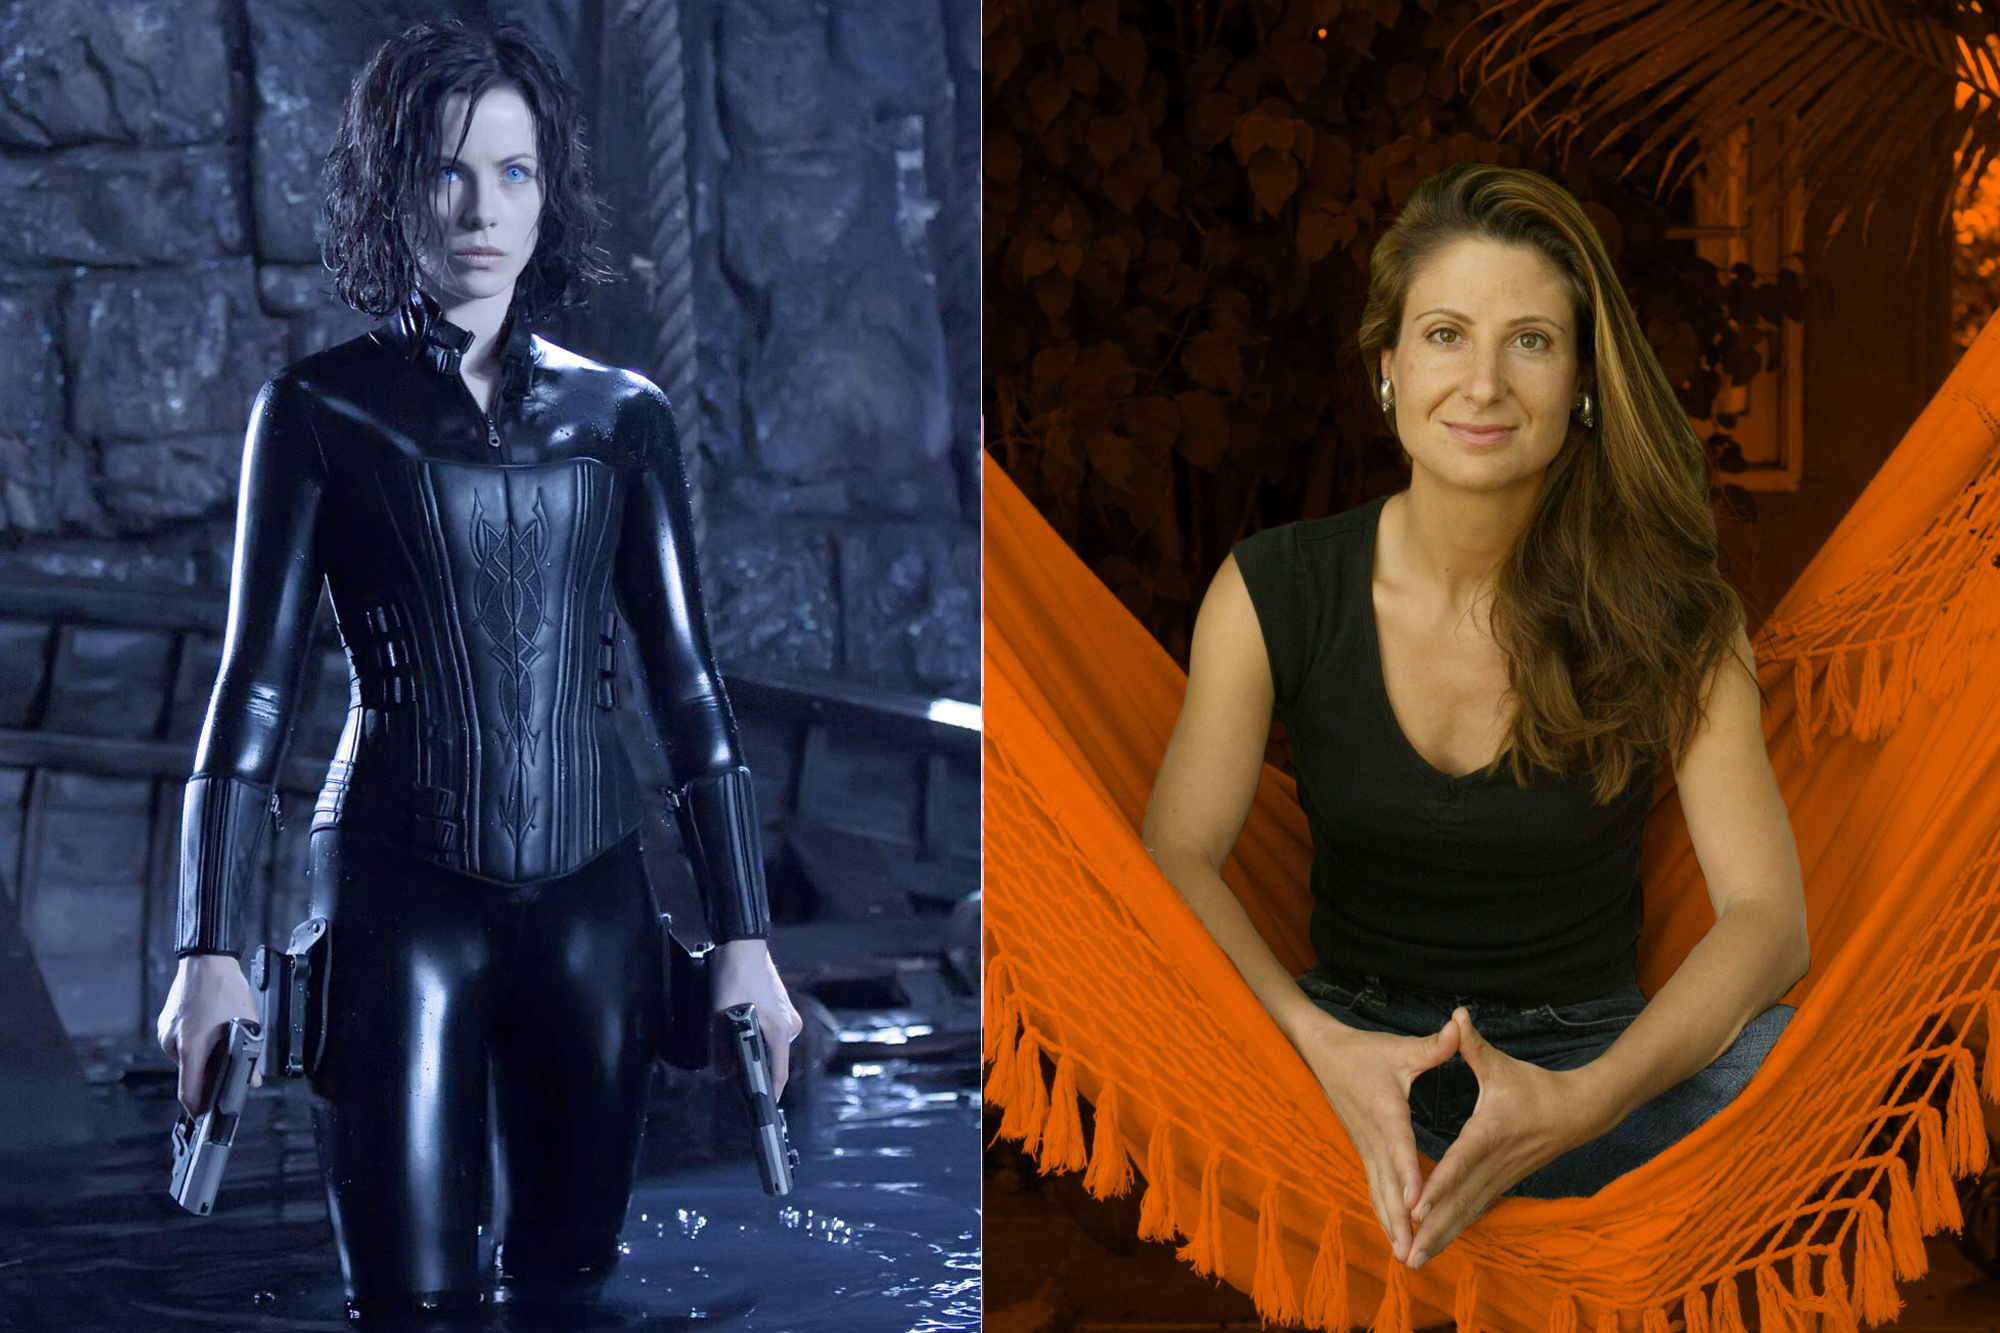 Anna Foerster, whose resume includes episodes of Criminal Minds and Outlander, will direct Underworld 5, starring Kate Beckinsale. Release date: Oct. 21